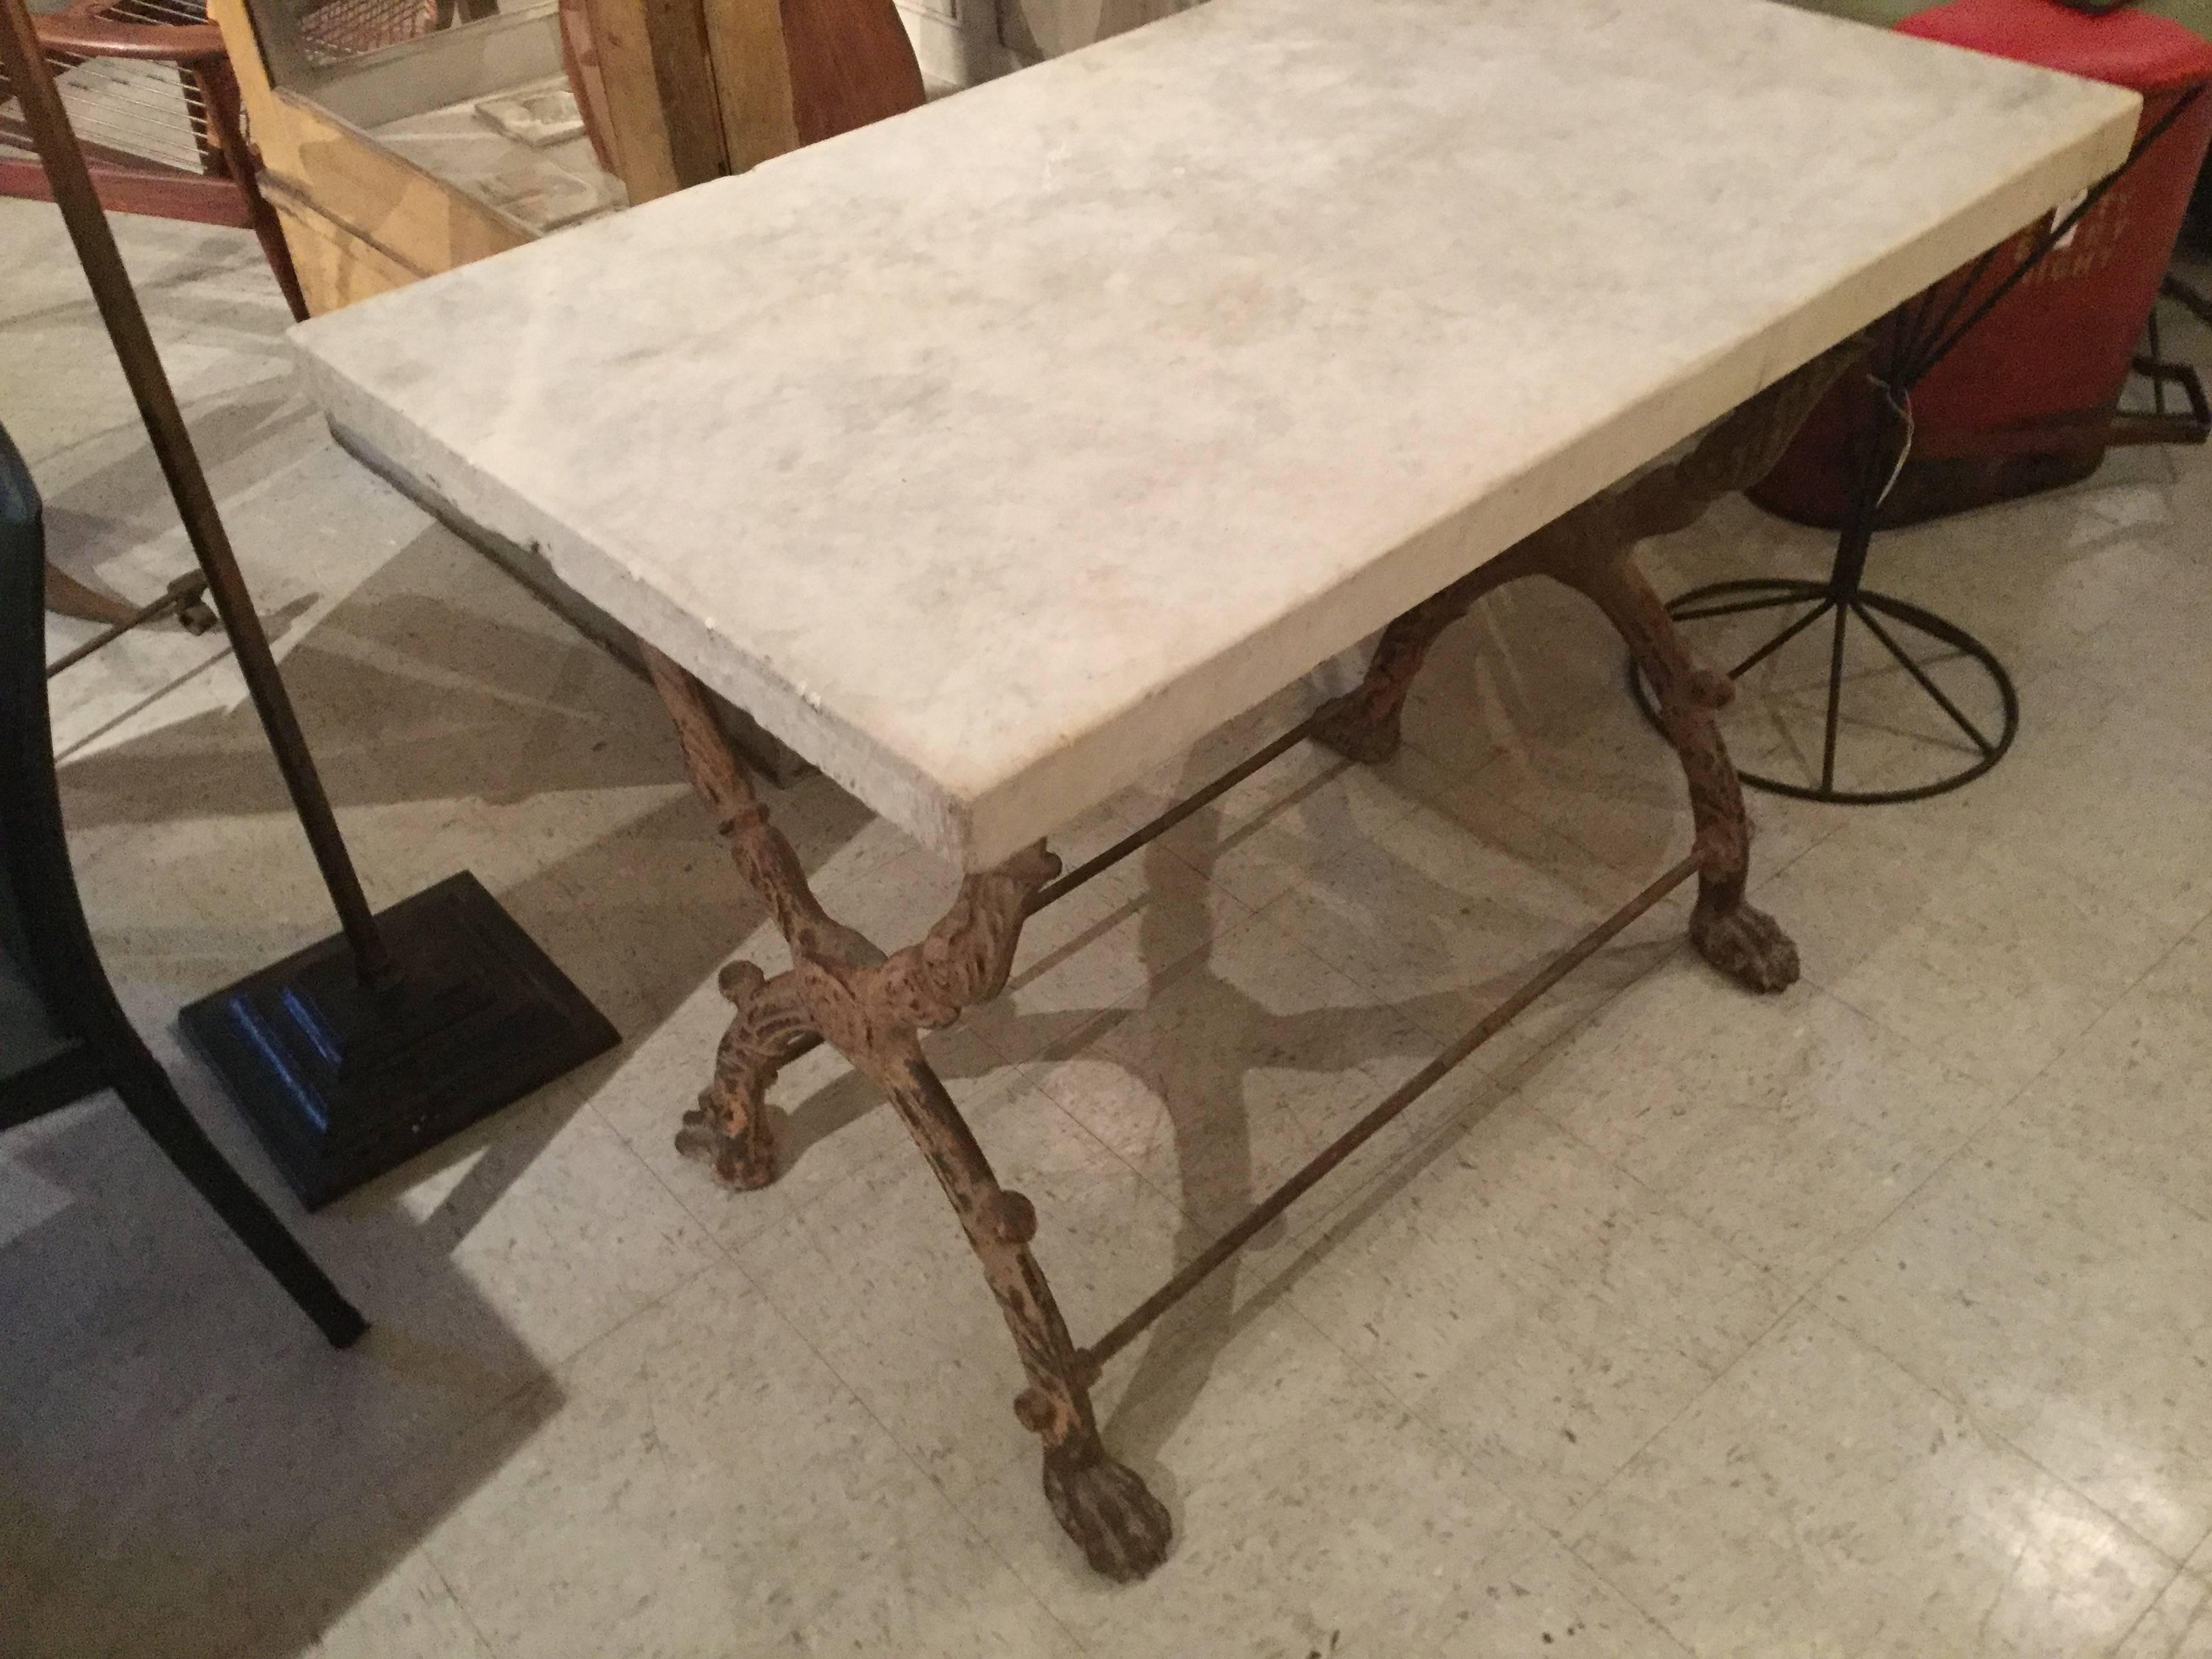 French garden table with 1 3/4 inch think marble top. Cast iron base with lion feet has original salmon color paint. The table has beautiful proportions and would look great in the best garden or indoors.